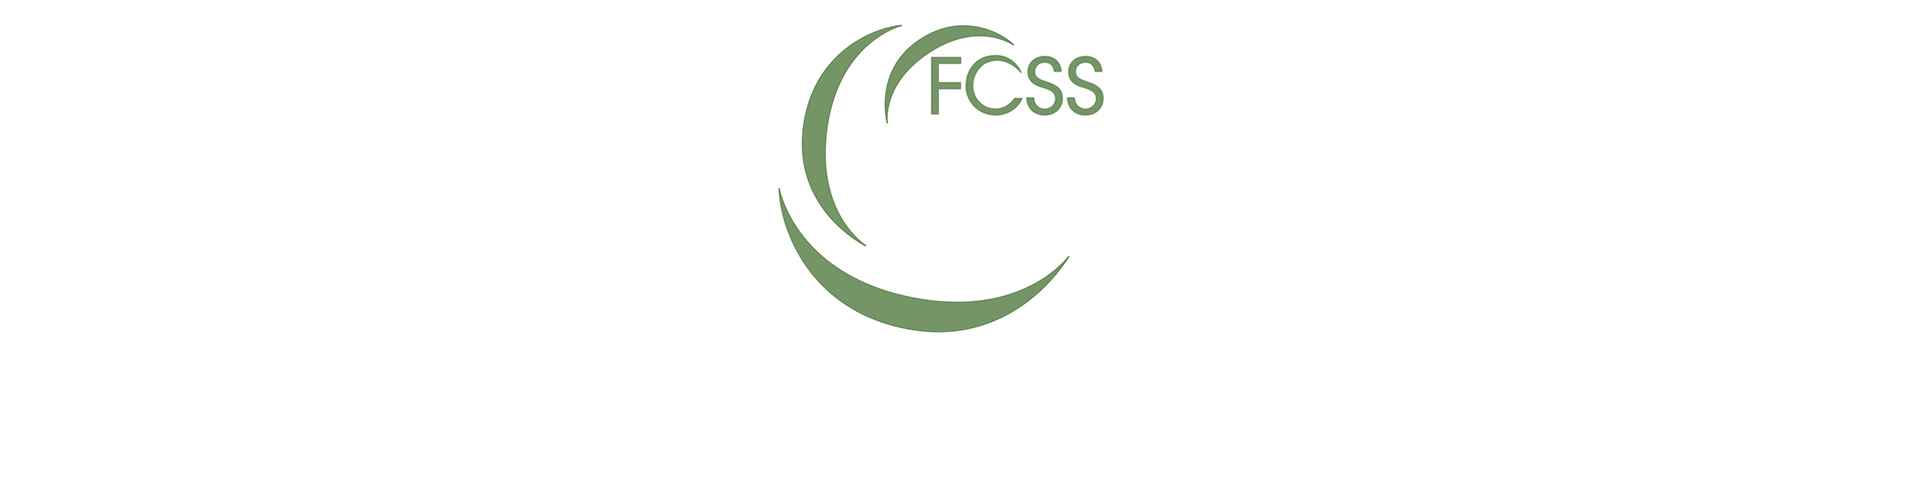 fcss